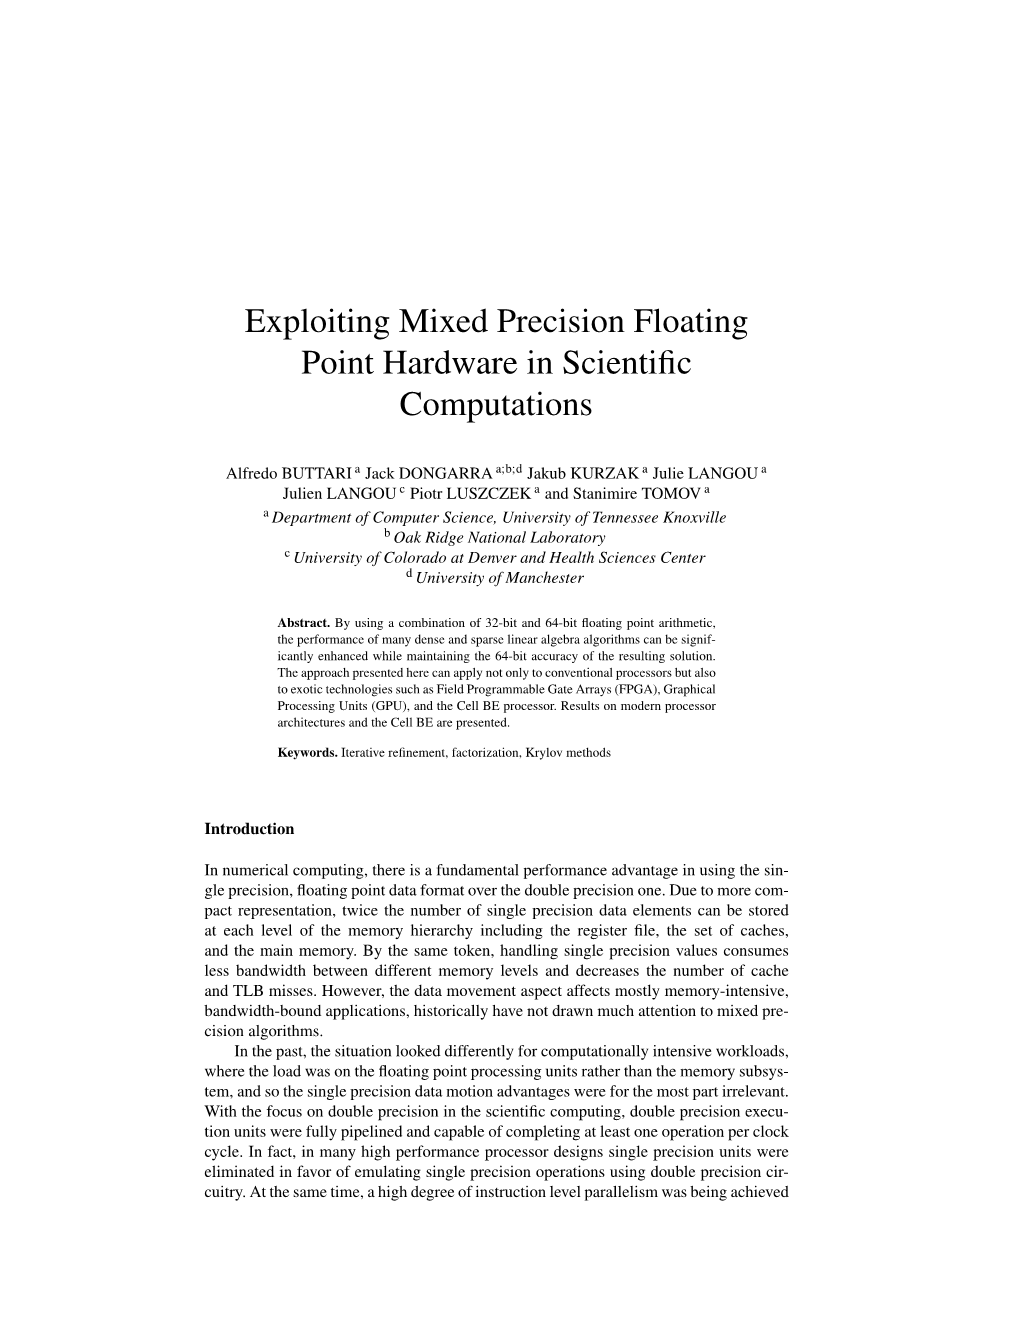 Exploiting Mixed Precision Floating Point Hardware in Scientiﬁc Computations